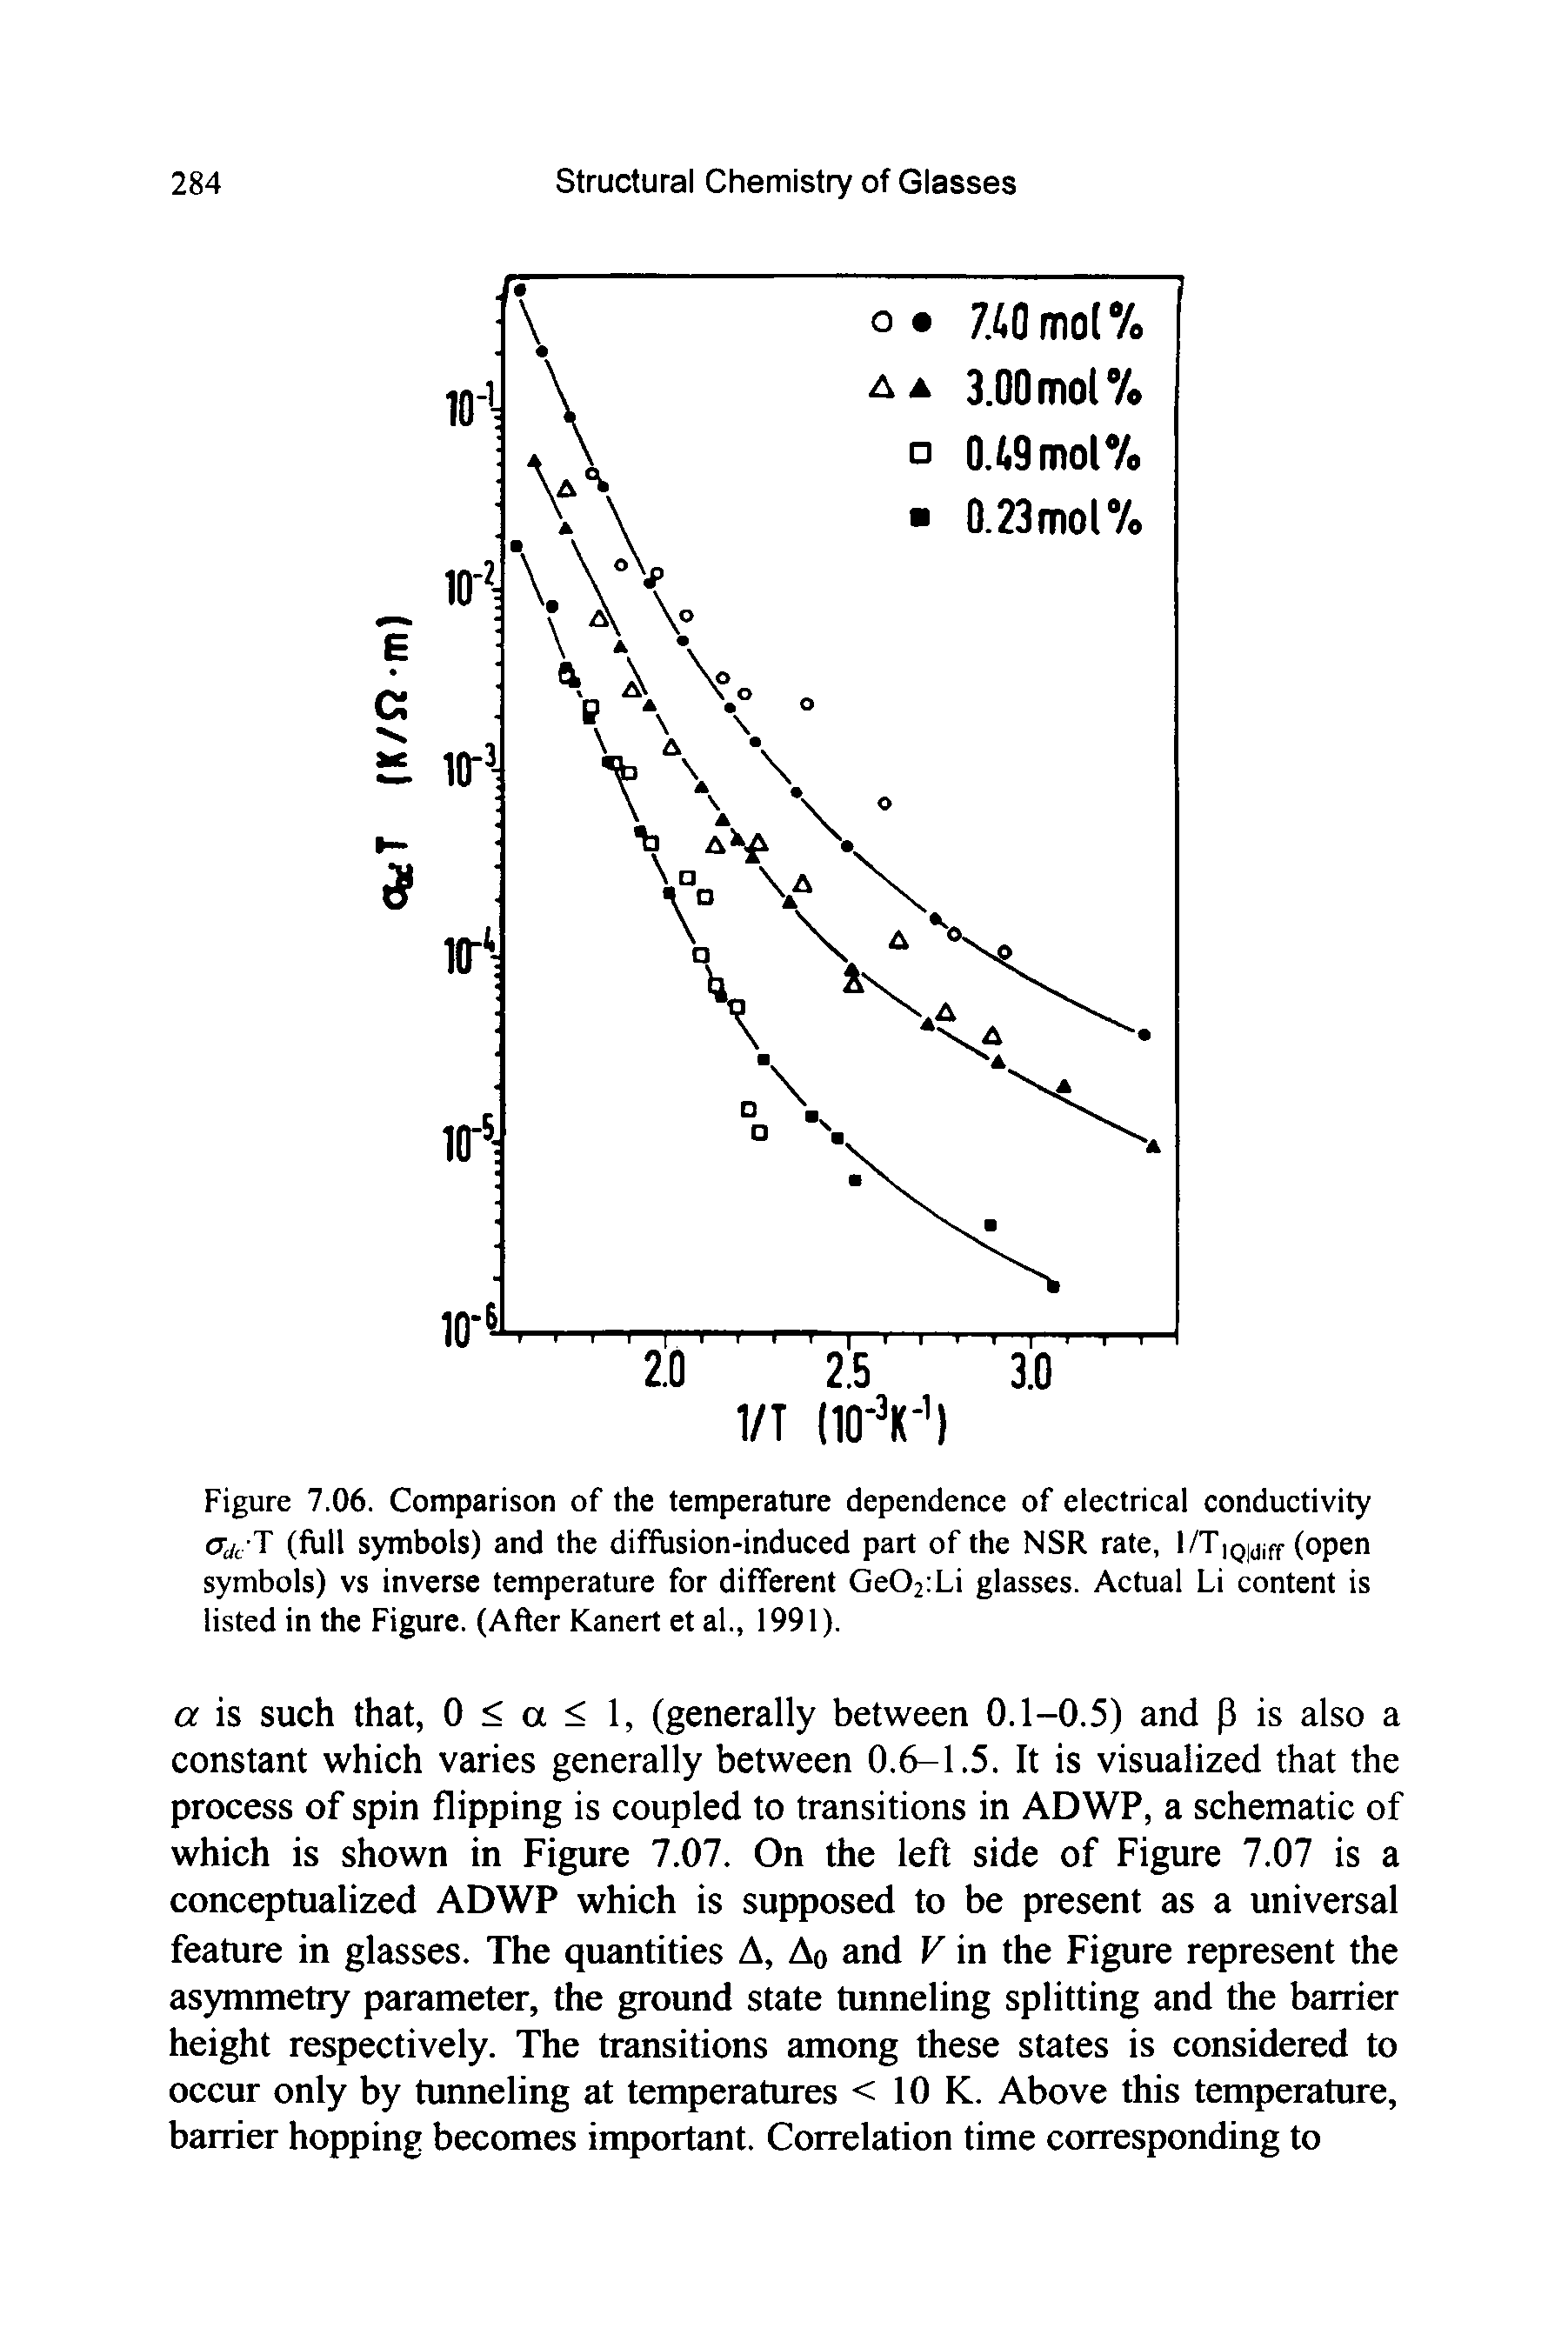 Figure 7.06. Comparison of the temperature dependence of electrical conductivity T (full symbols) and the diffusion-induced part of the NSR rate, l/T Qjj ff (open symbols) vs inverse temperature for different Ge02 Li glasses. Actual Li content is listed in the Figure. (After Kanert et al., 1991).